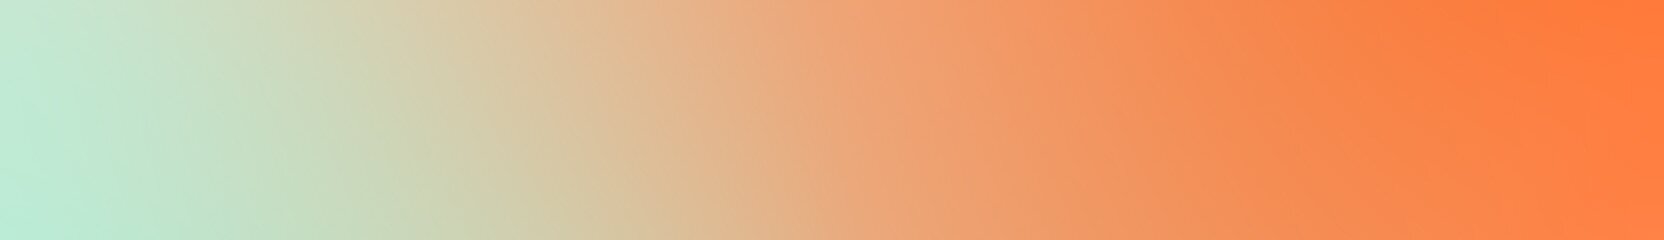 An orange and green gradient background.